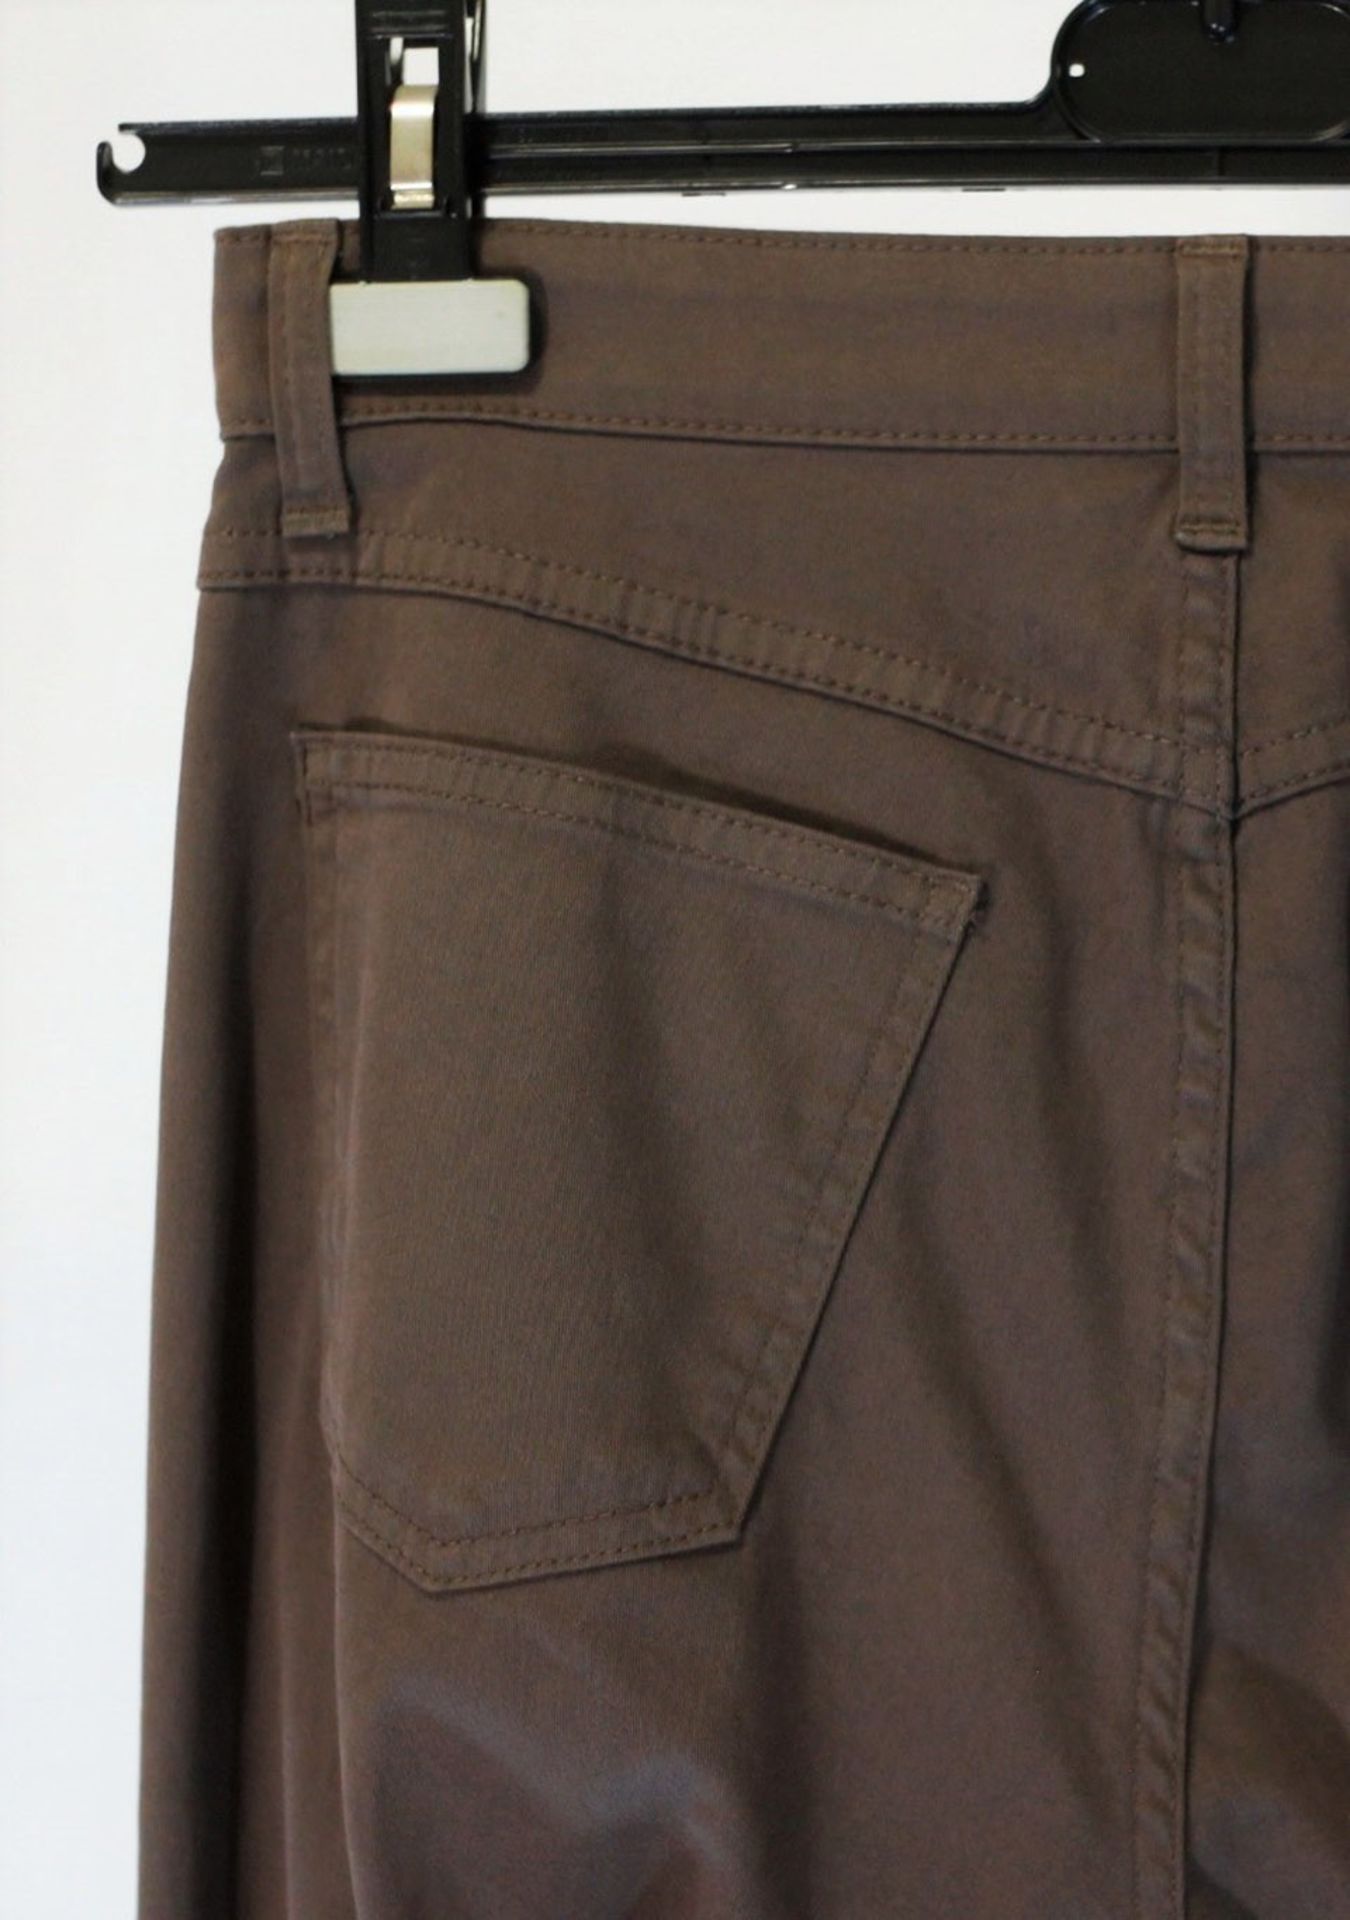 1 x Agnona Brown Jeans - Size: 12 - Material: 98% Cotton, 2% Elastane. Lining 100% Cotton - From a - Image 3 of 6